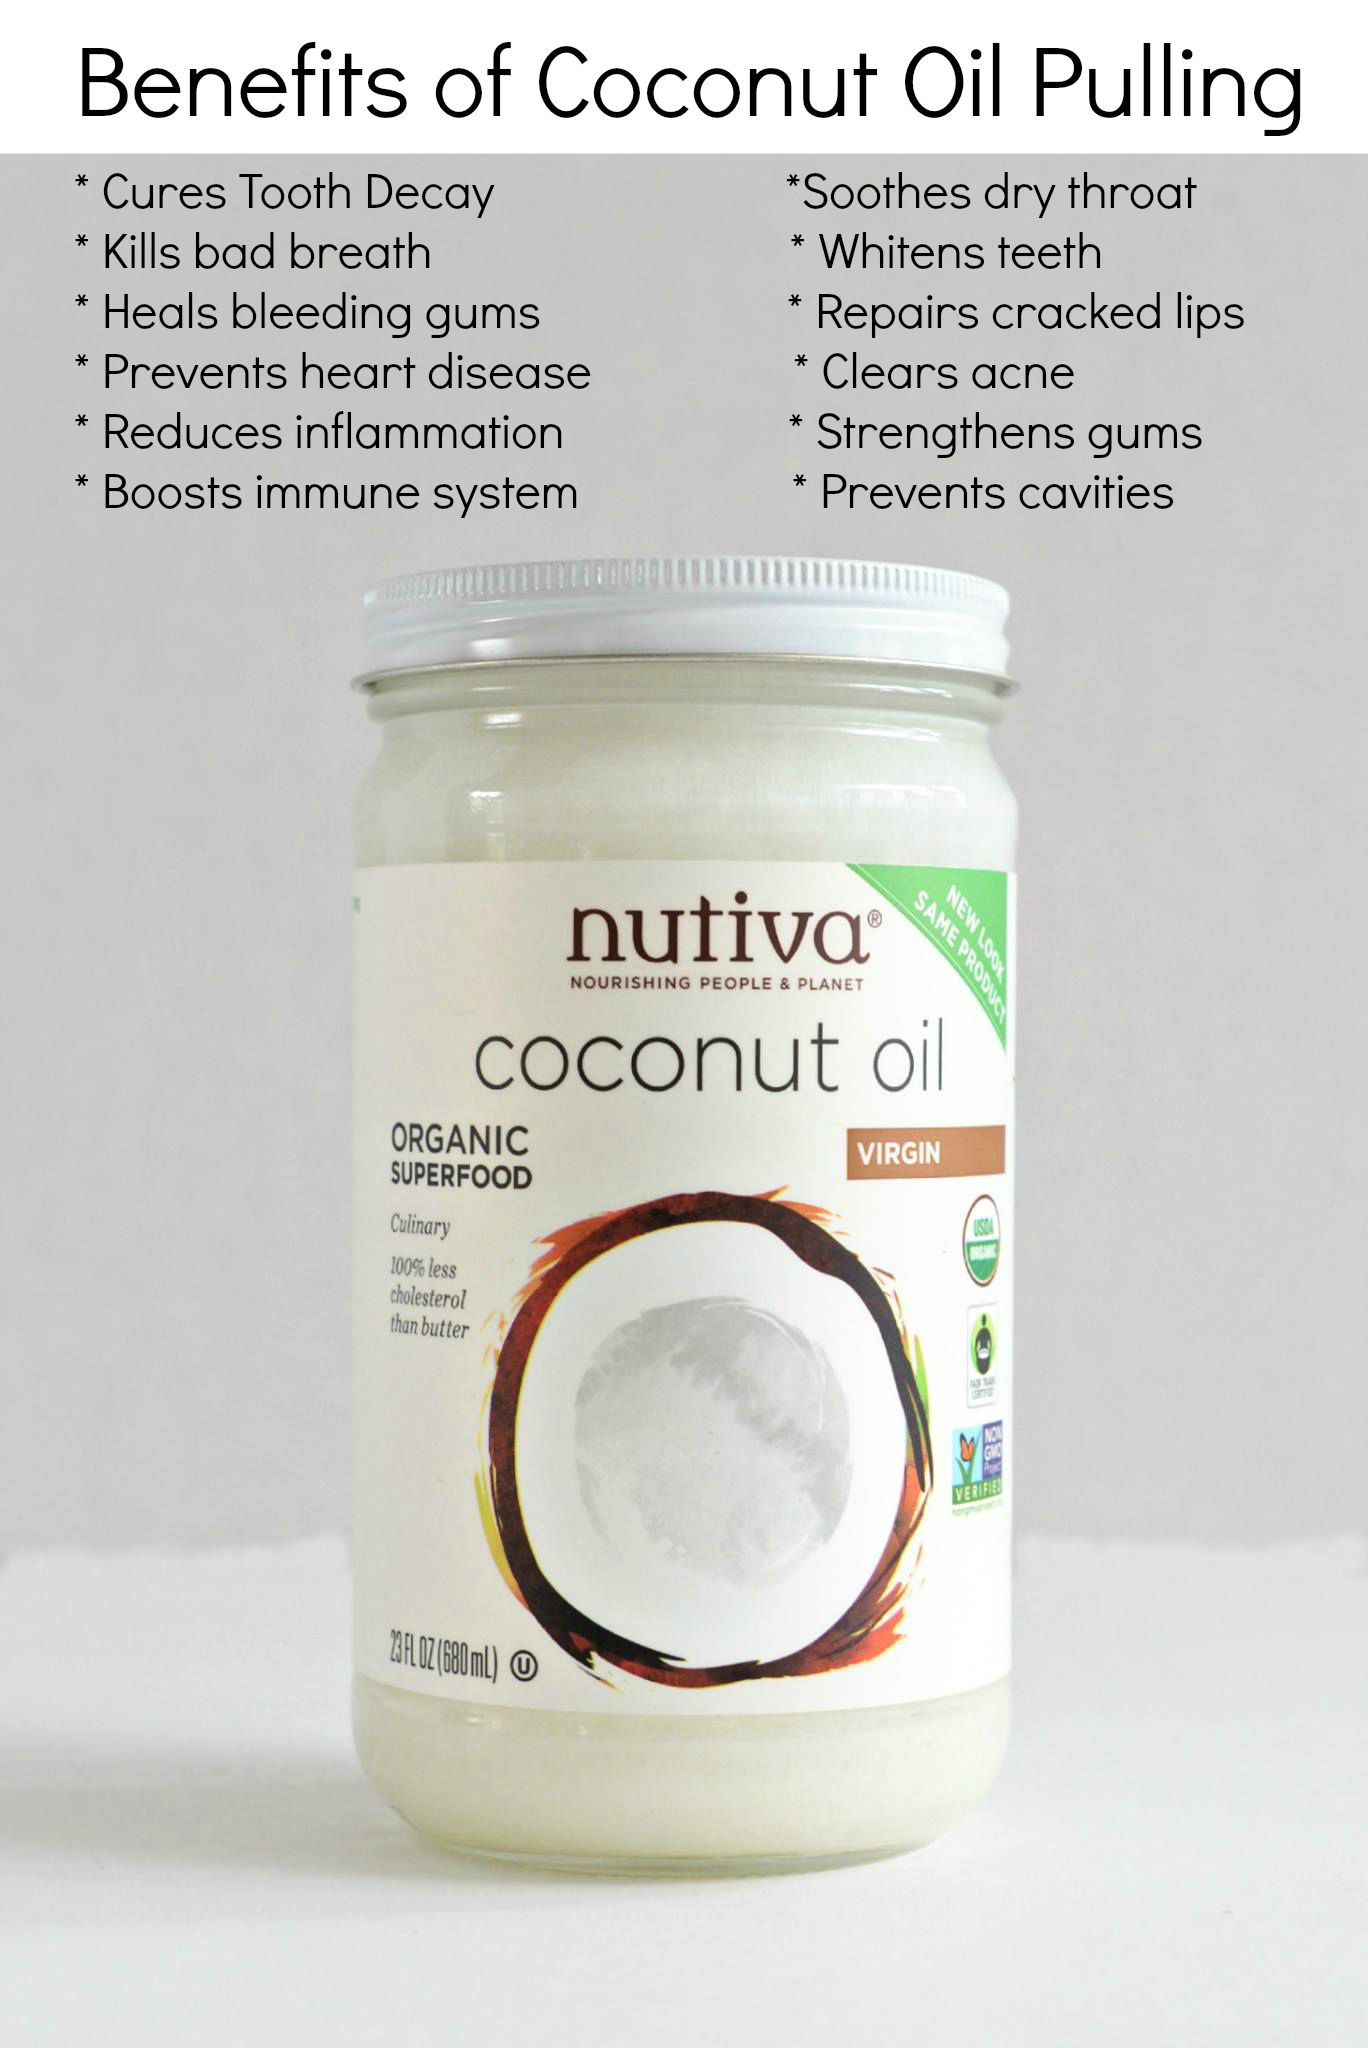 Health Benefits of Coconut Oil Pulling